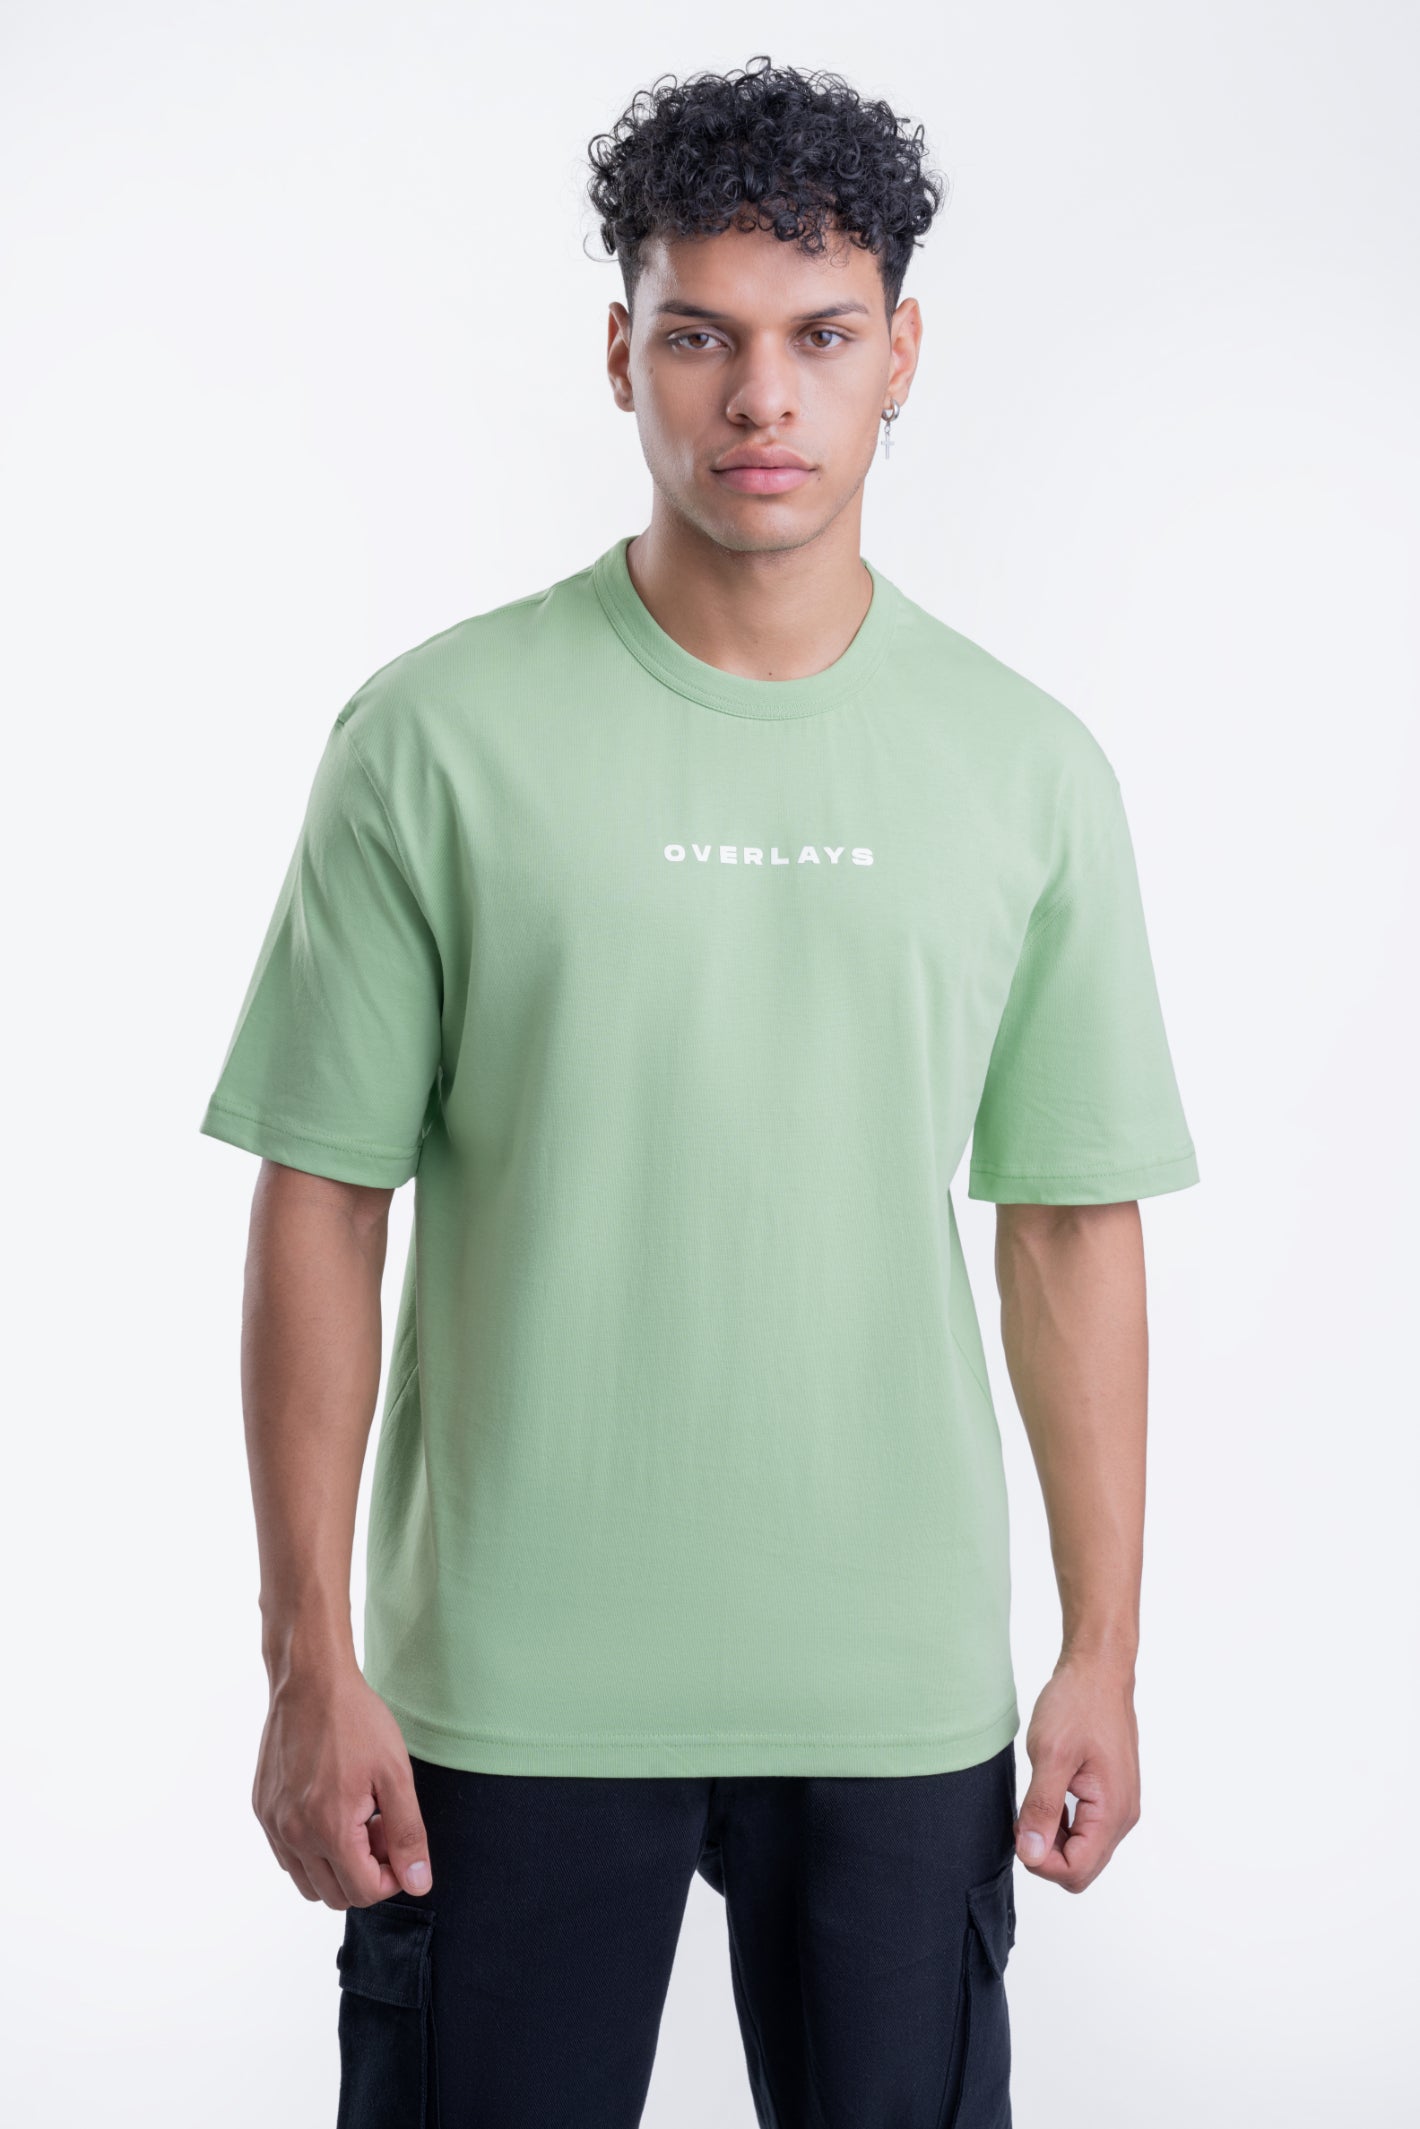 Relaxed Fit Men's Dare To Dream Tshirt - Green